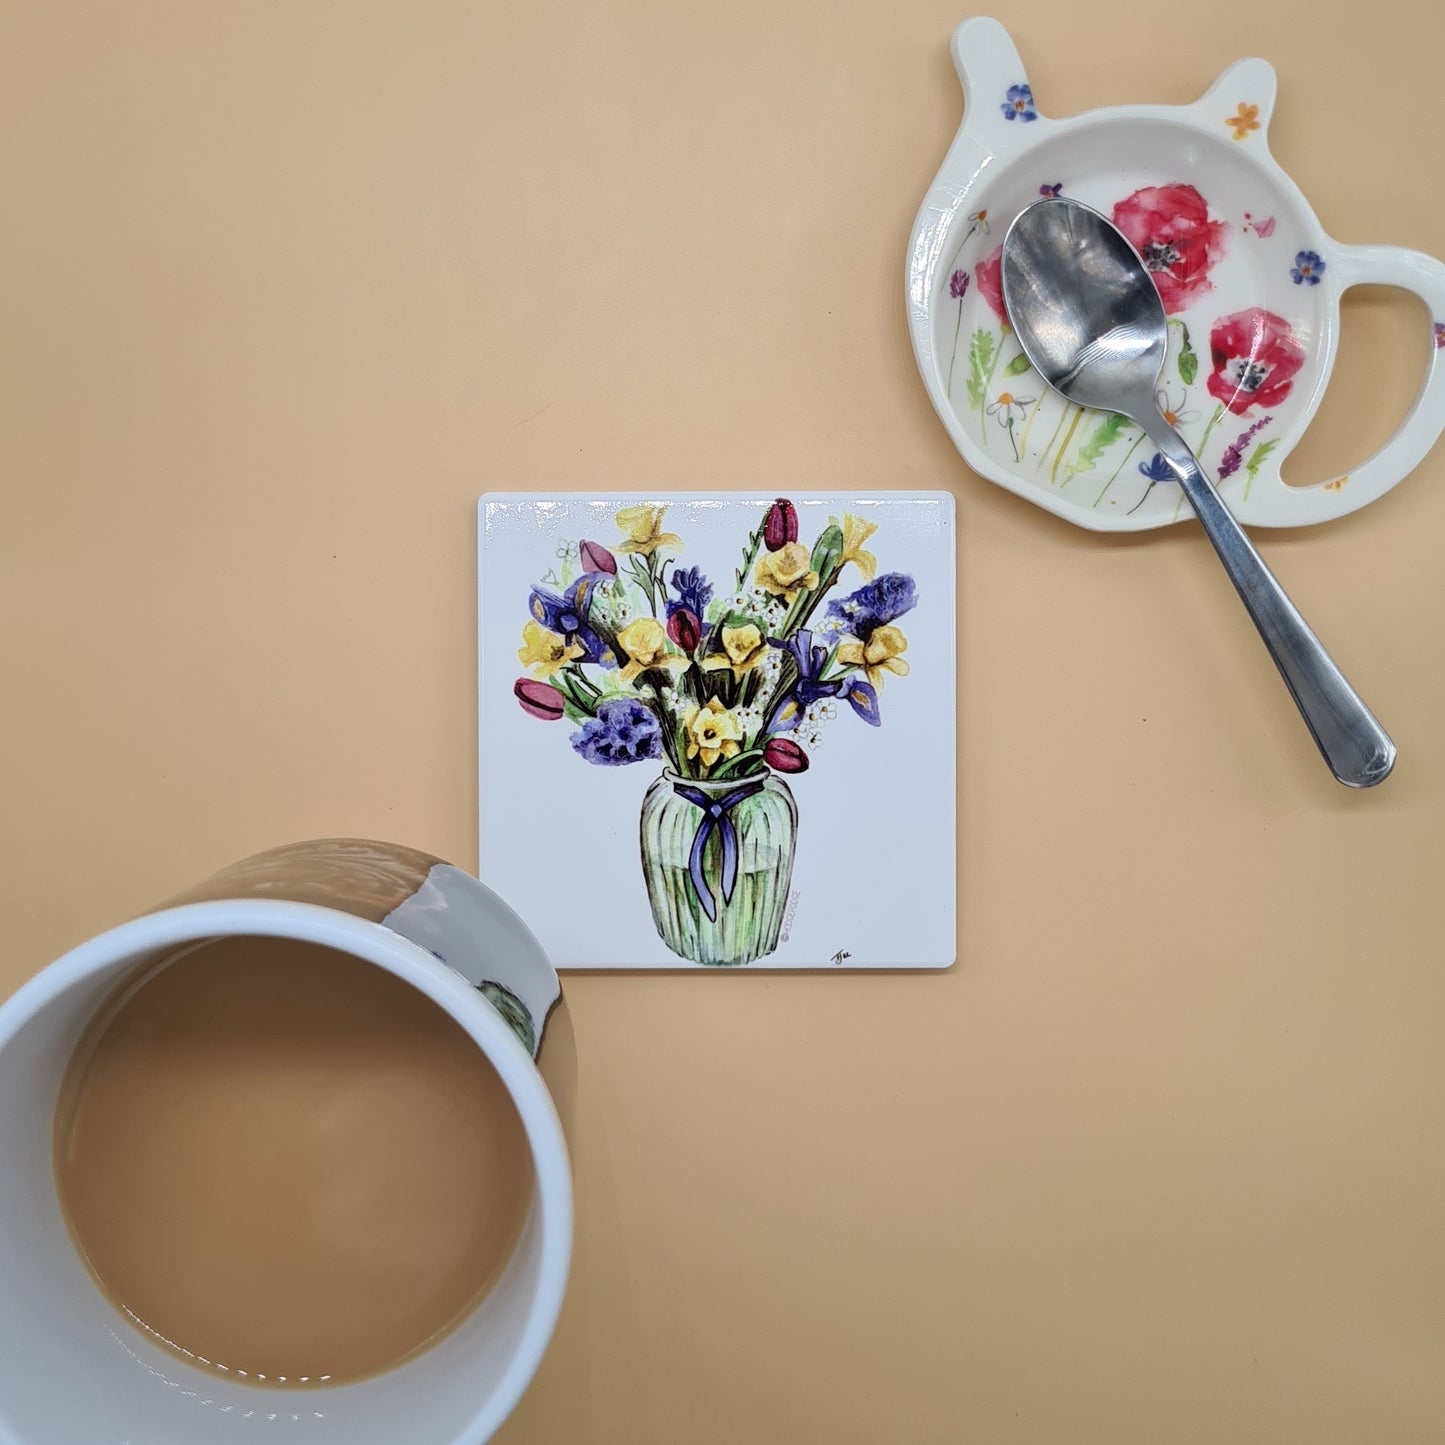 Beautiful Flowers Art Ceramic Coaster featuring 'A Bunch of Spring' Print